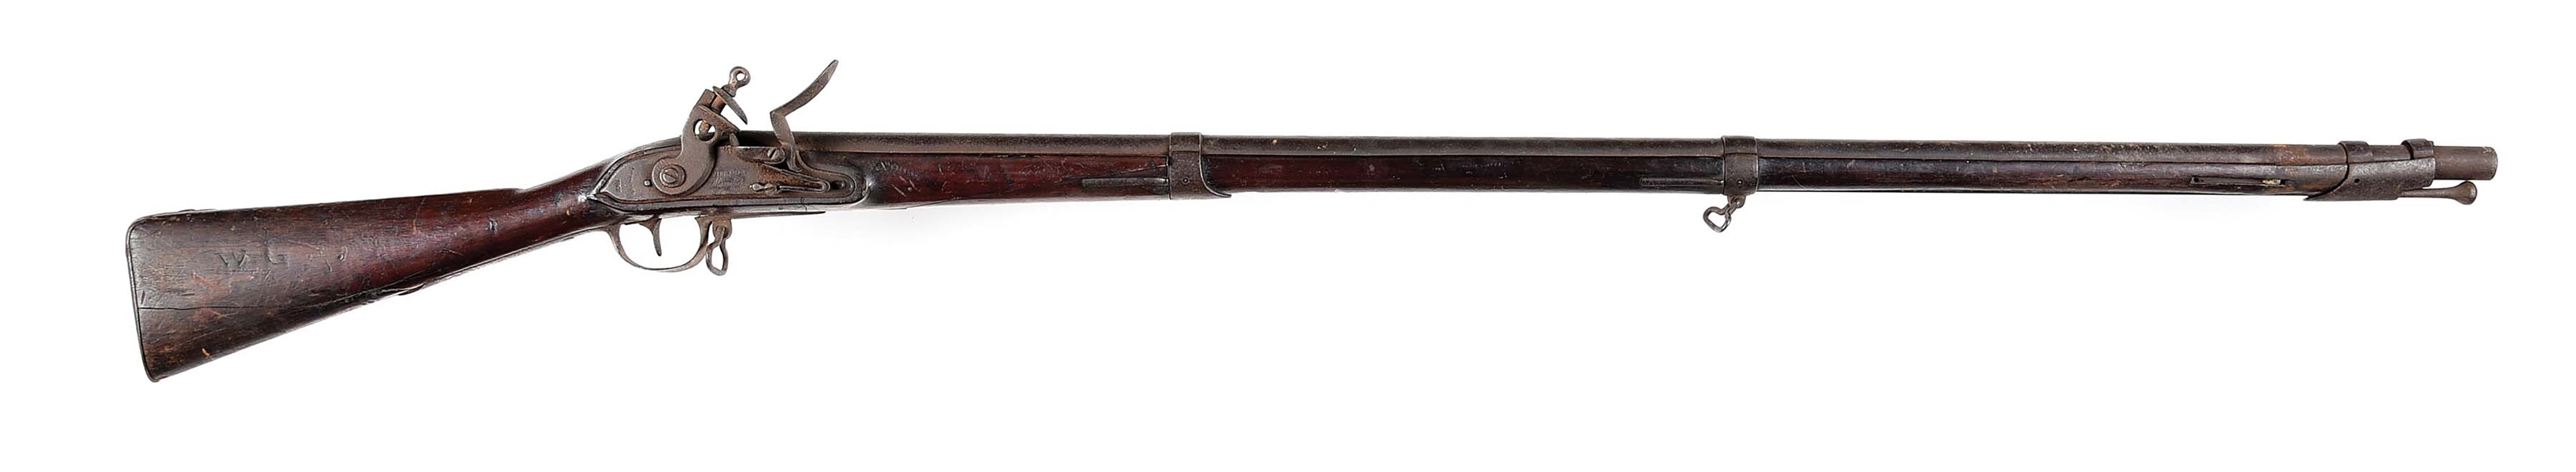 (A) "AS FOUND" 1807 DATED VIRGINIA MANUFACTORY FIRST MODEL FLINTLOCK MUSKET.